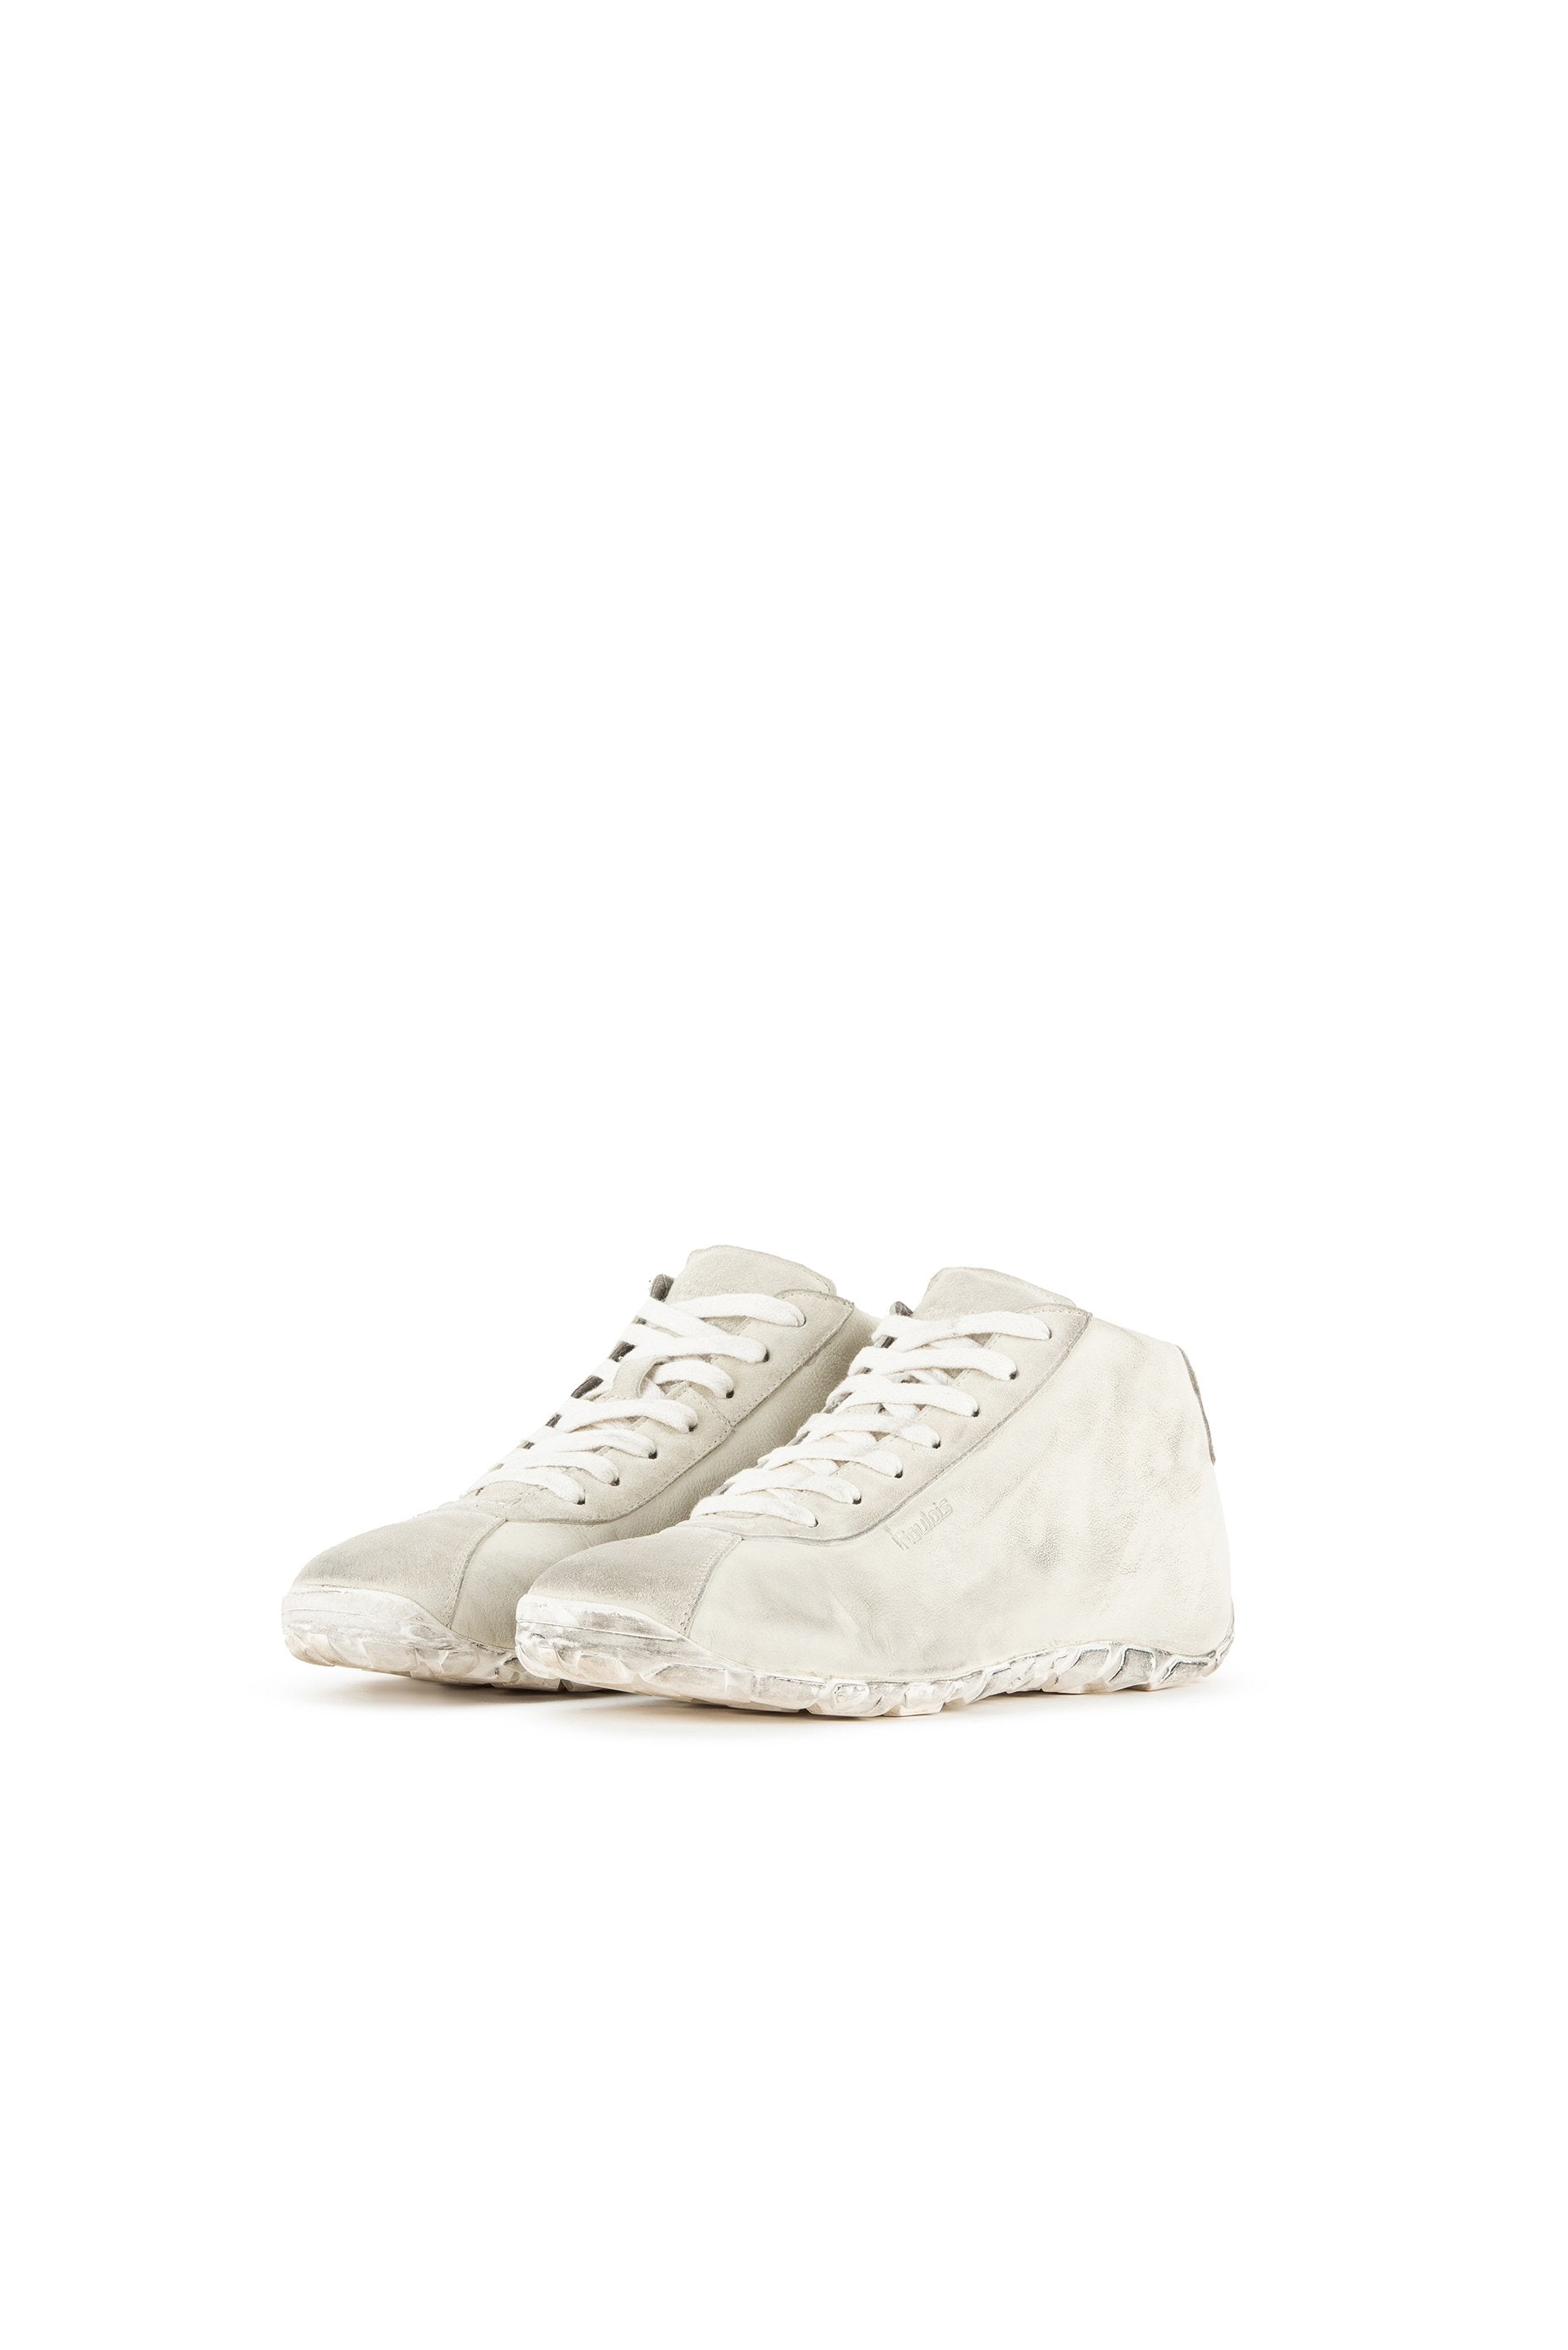 SADDLE-LO IN DISTRESSED WHITE